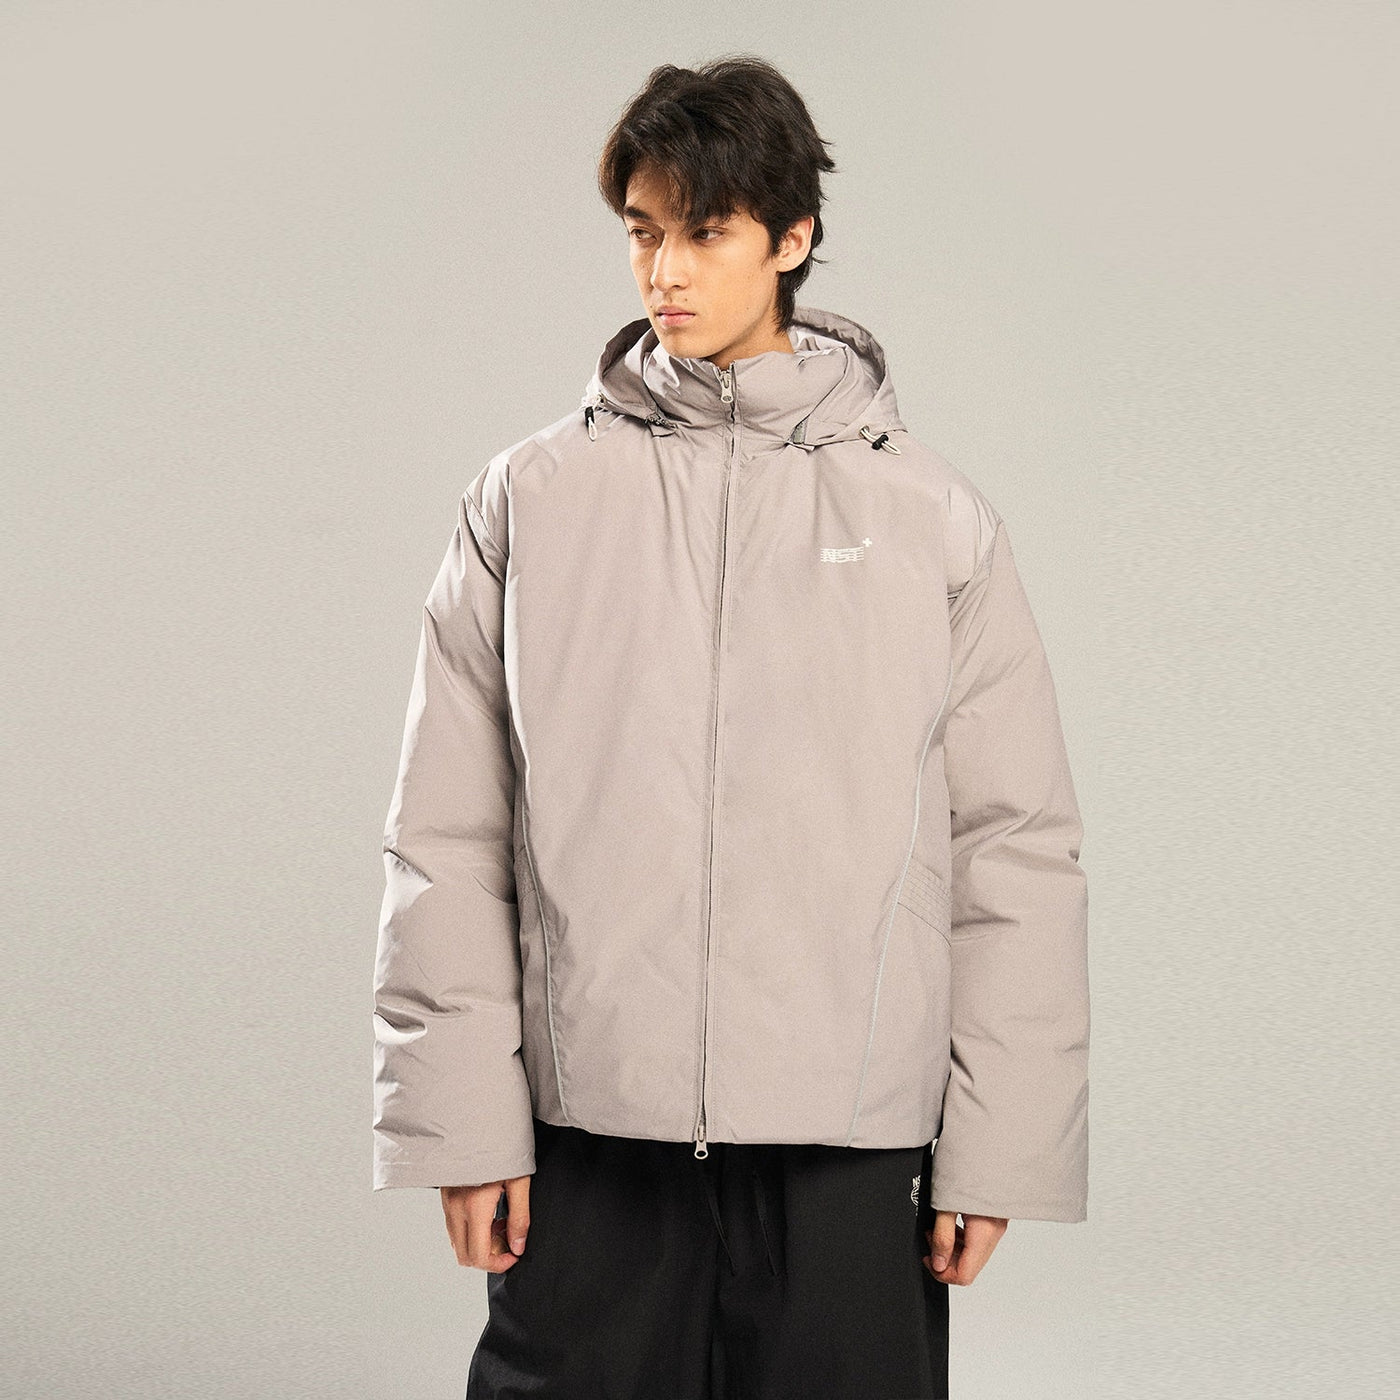 Zip-Up Hooded Puffer Jacket Korean Street Fashion Jacket By New Start Shop Online at OH Vault